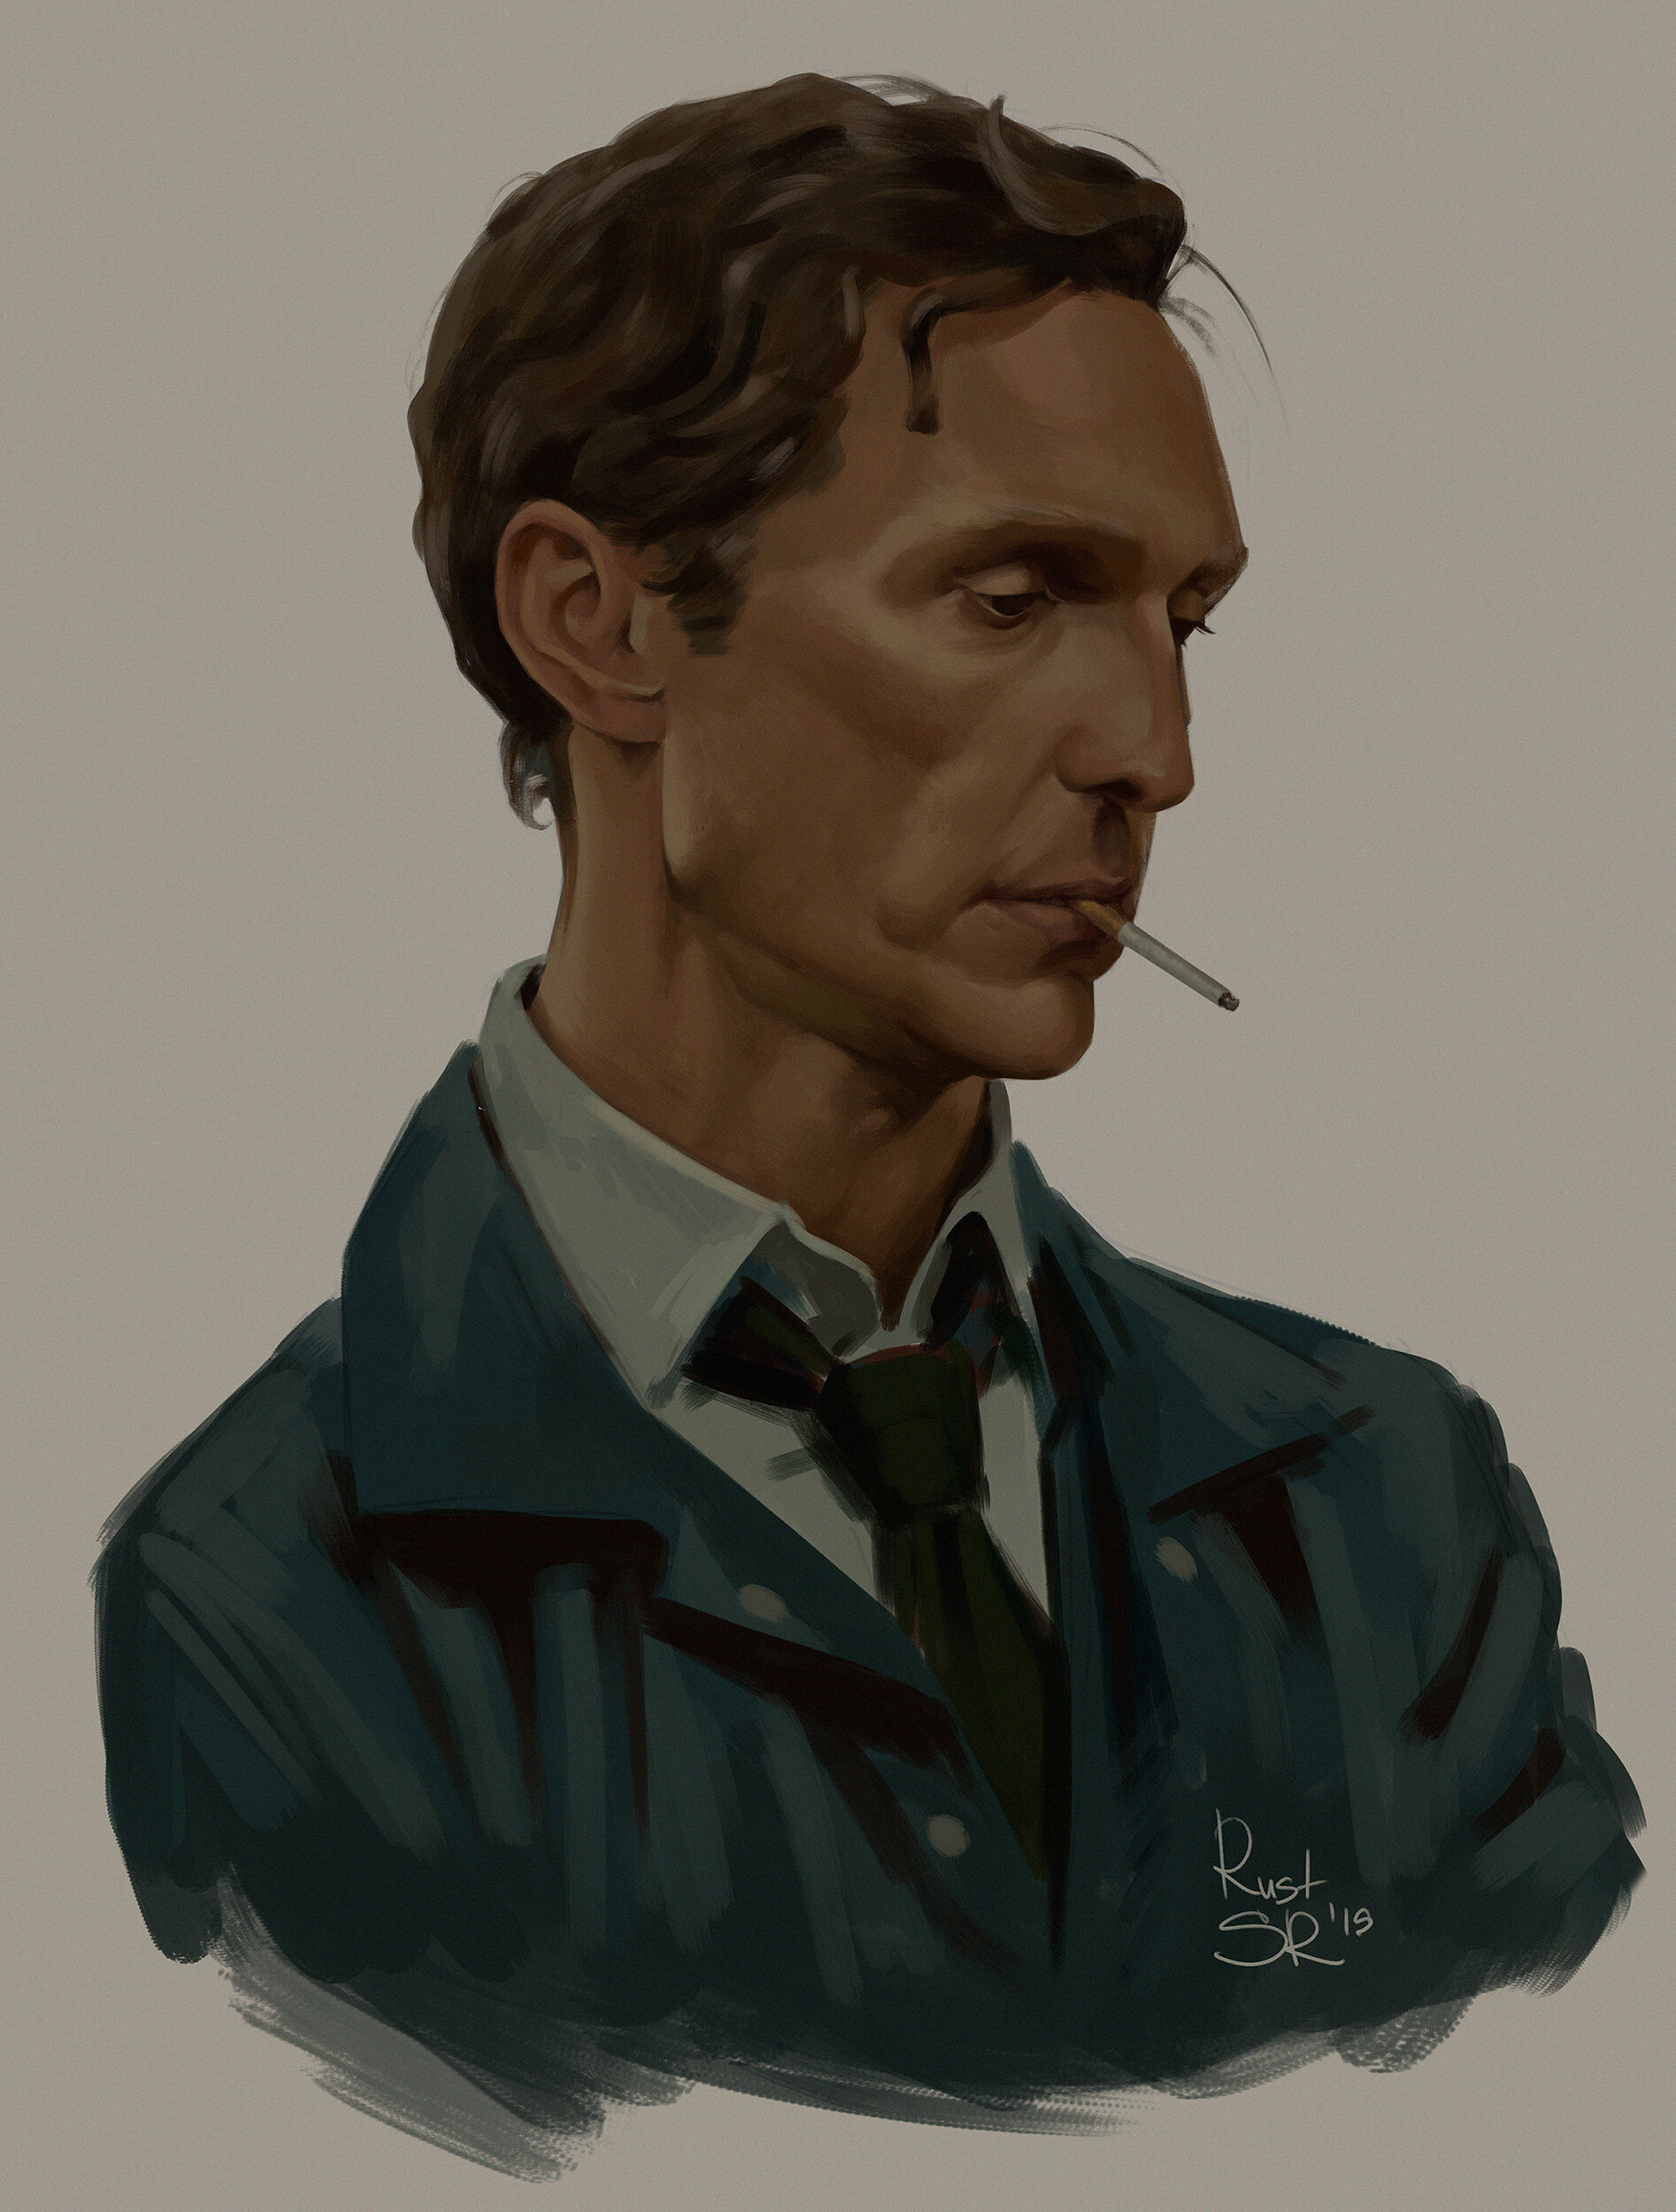 Detective rust cohle фото 11